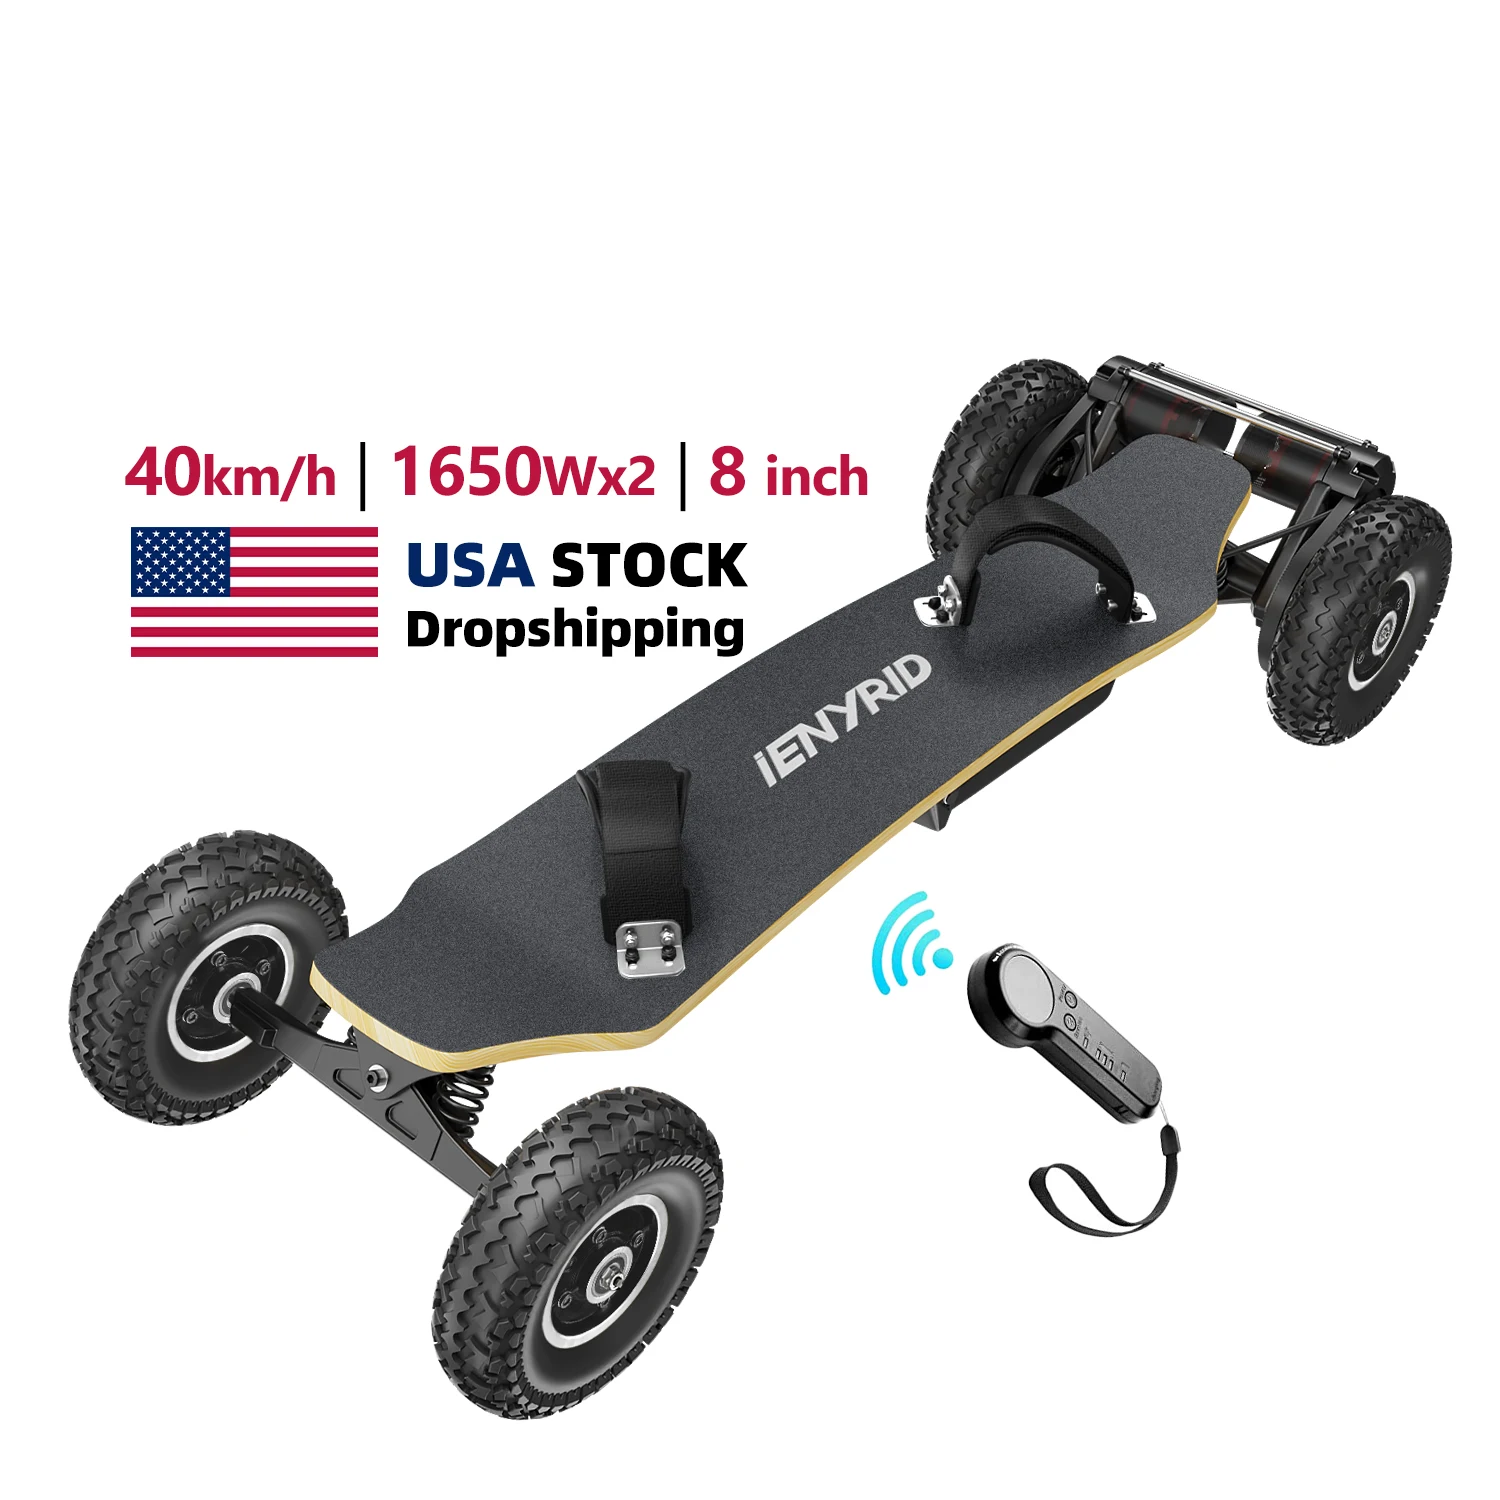 

Best selling all Terrain Electric Skateboard Dual Motor Each 1650W*2 CE RoHS with Remote Control for American market